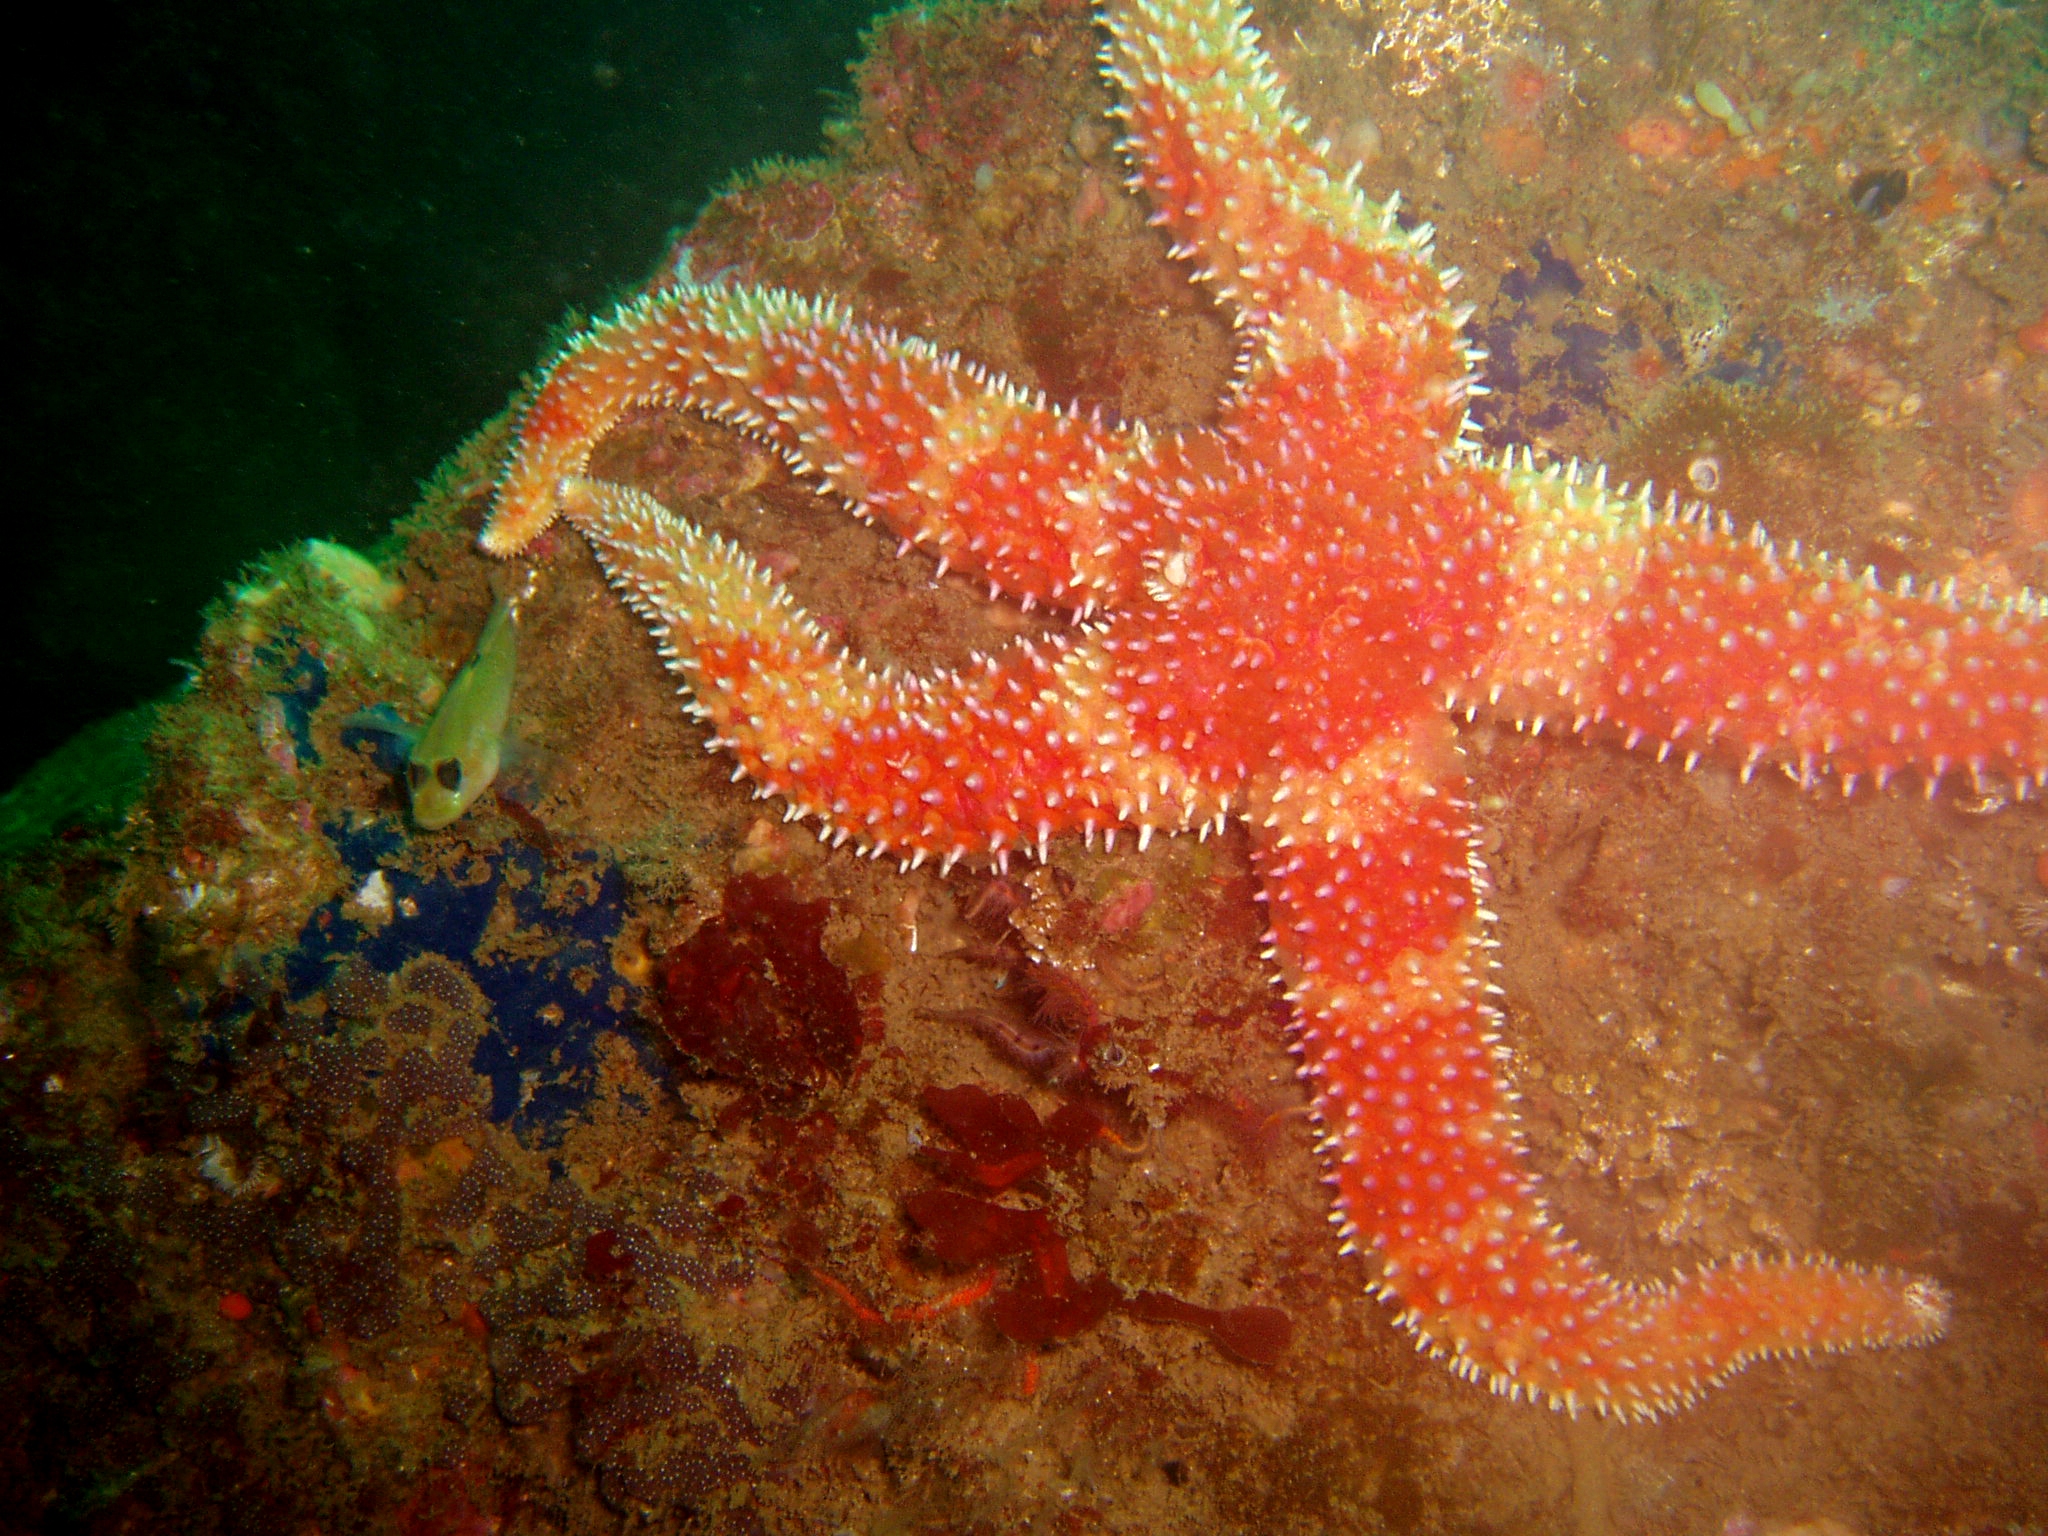 a sea starfish on a coral reef in red sea